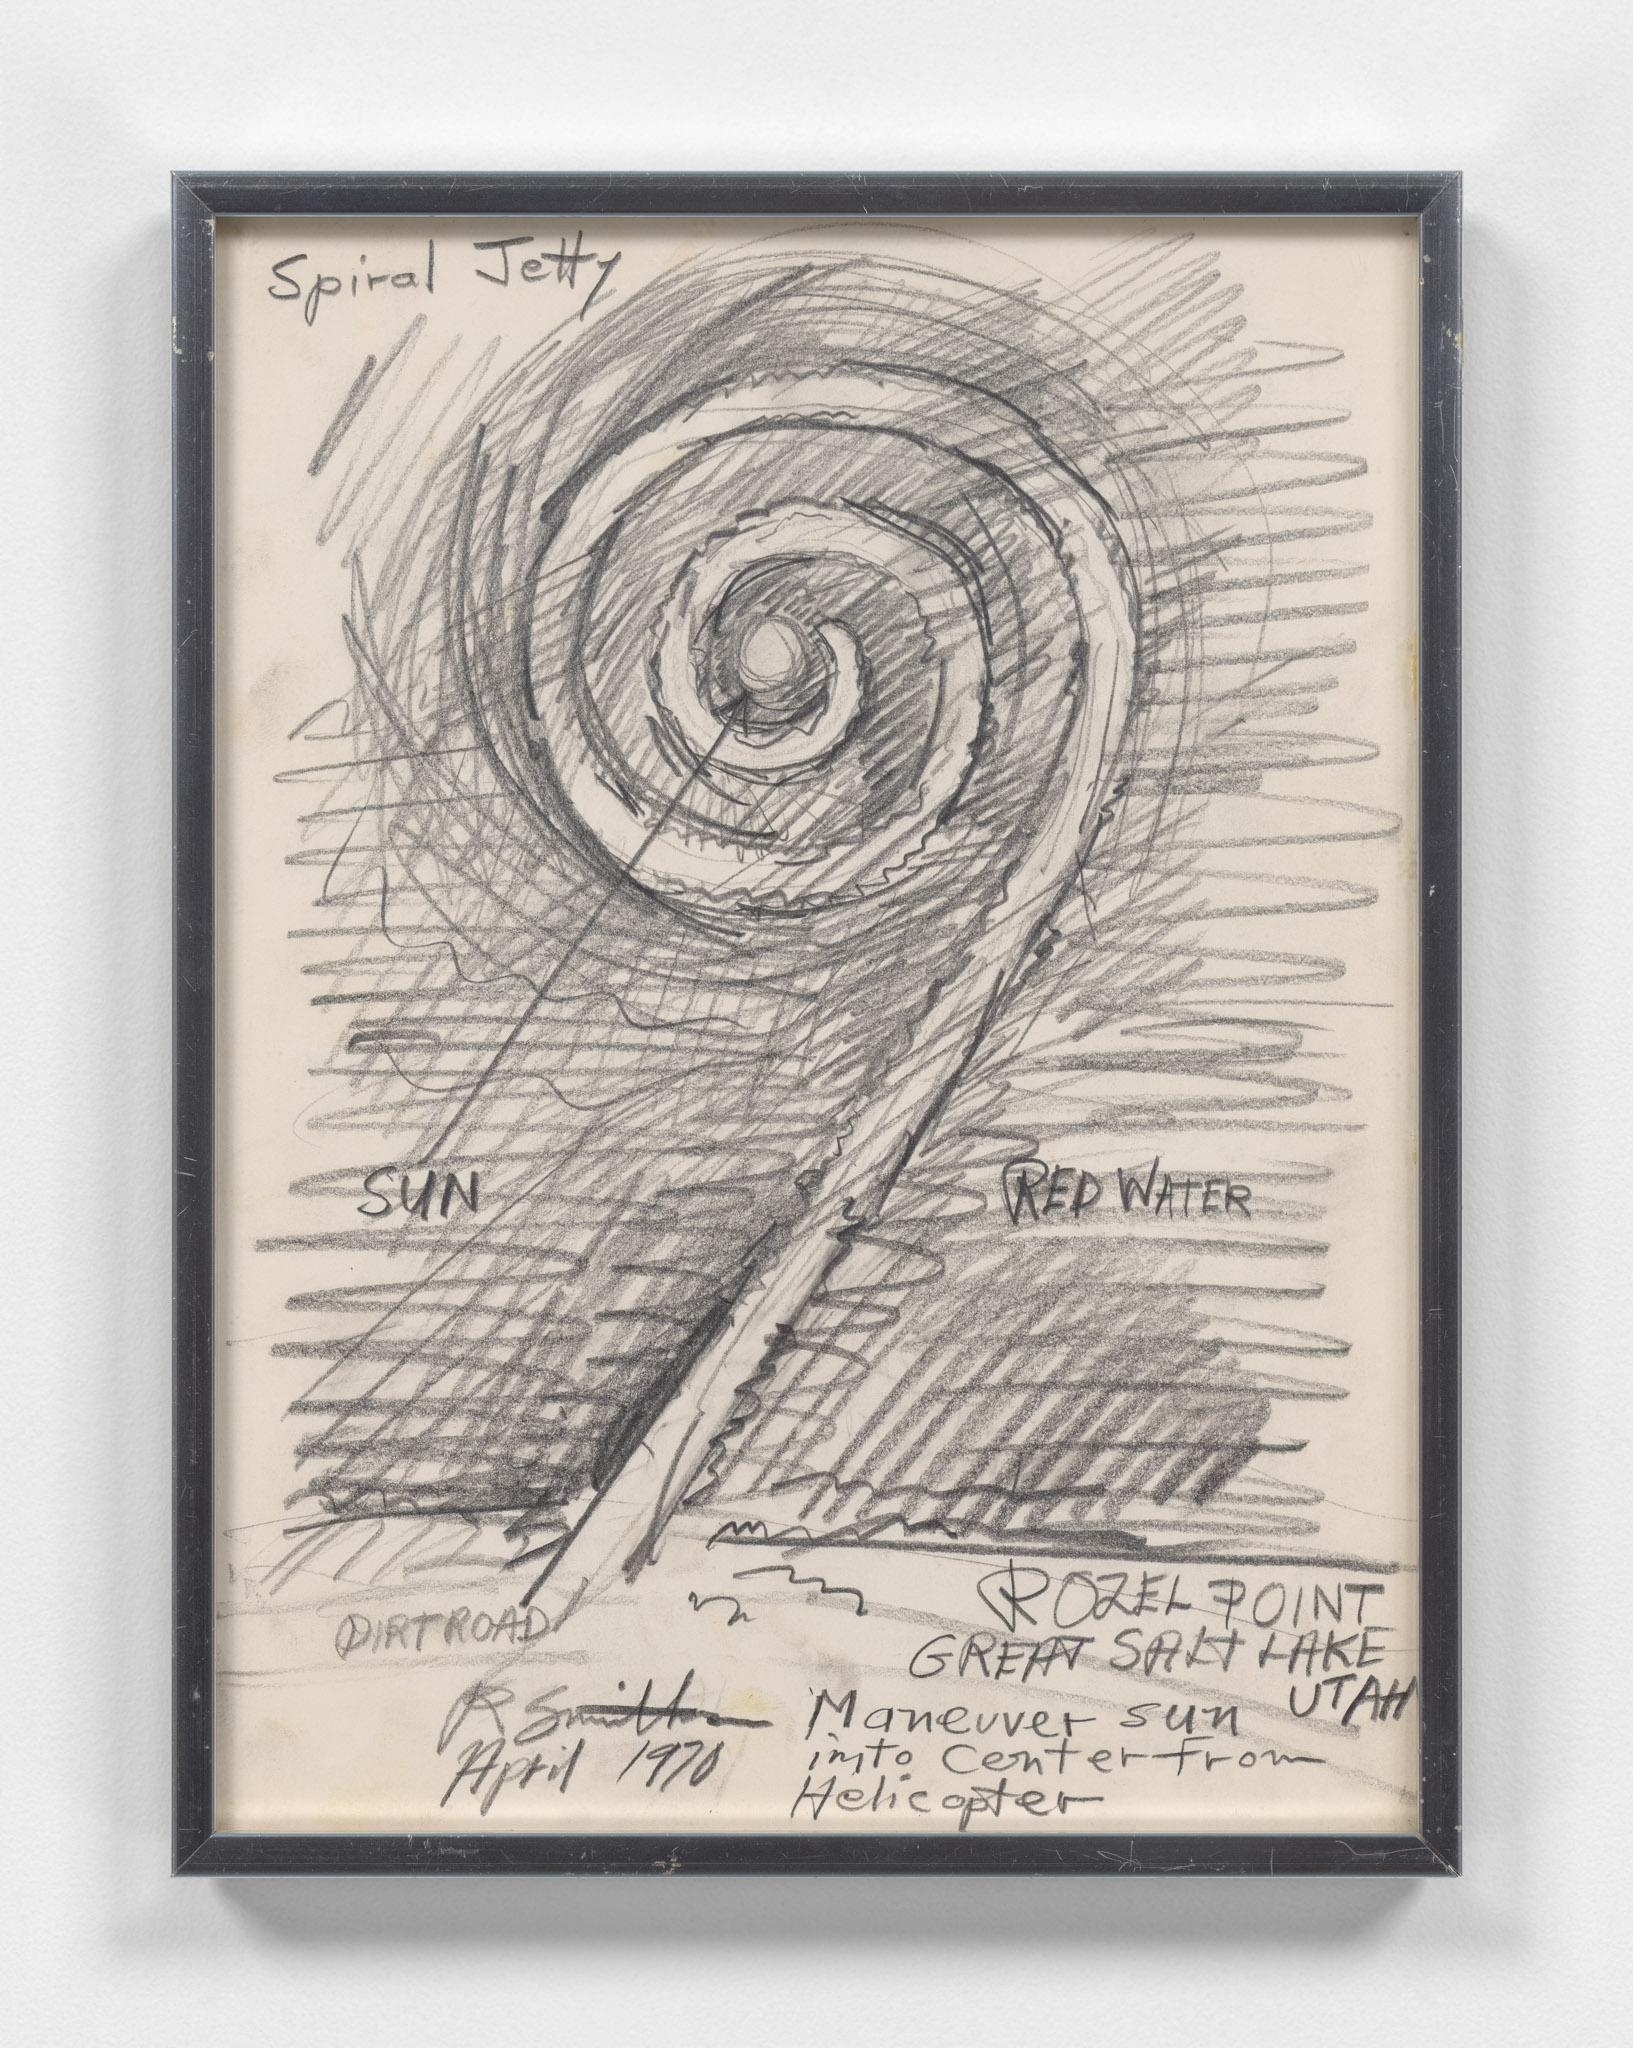 a graphite drawing by Robert Smithson of the Spiral Jetty